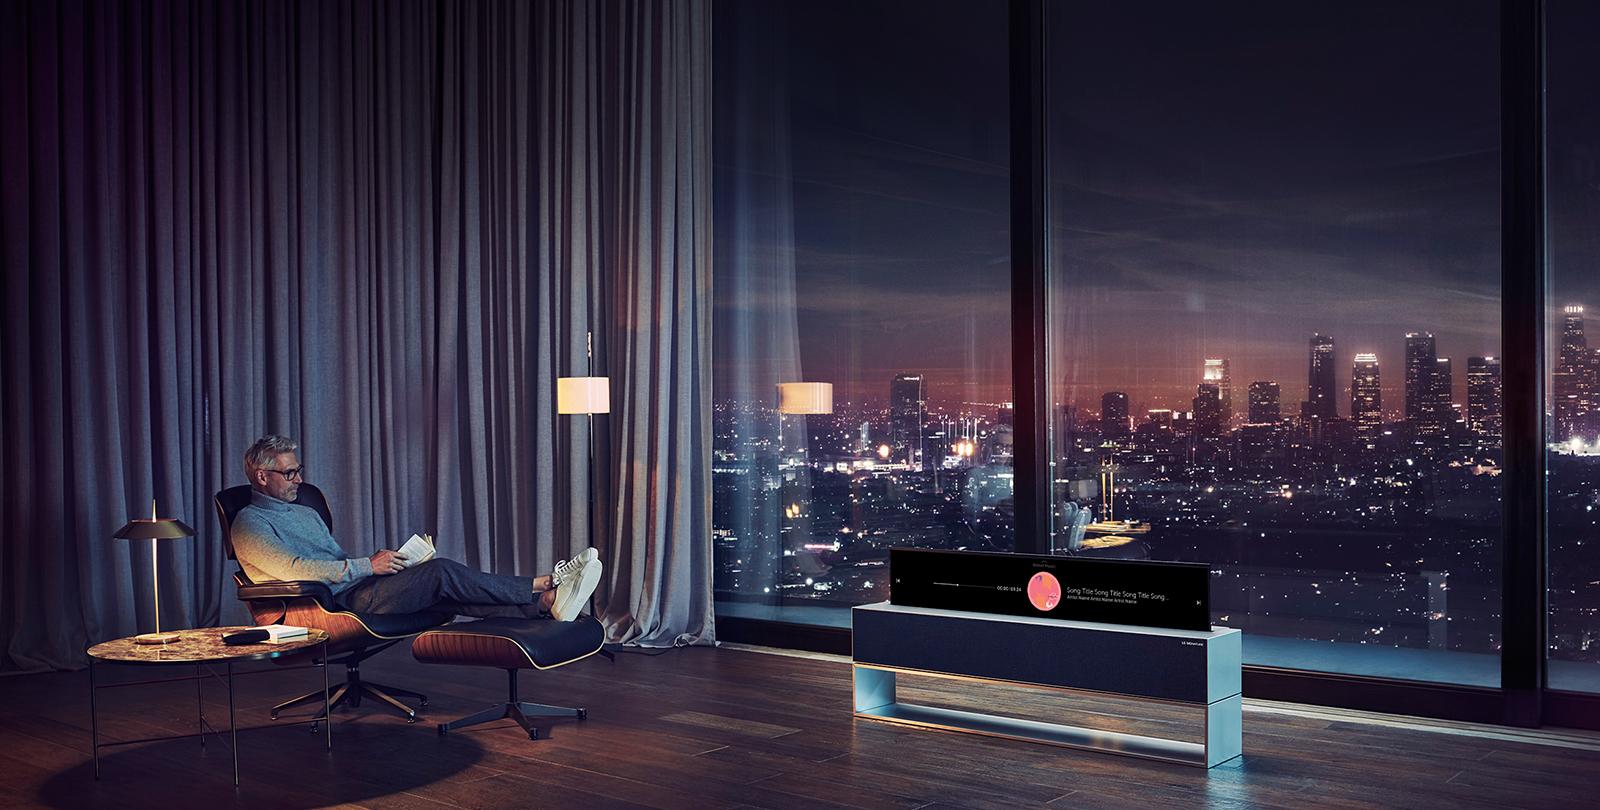 Maximize your living space with infinite possibilities. LG SIGNATURE OLED TV R redefines your space and offers the next level of lifestyle.